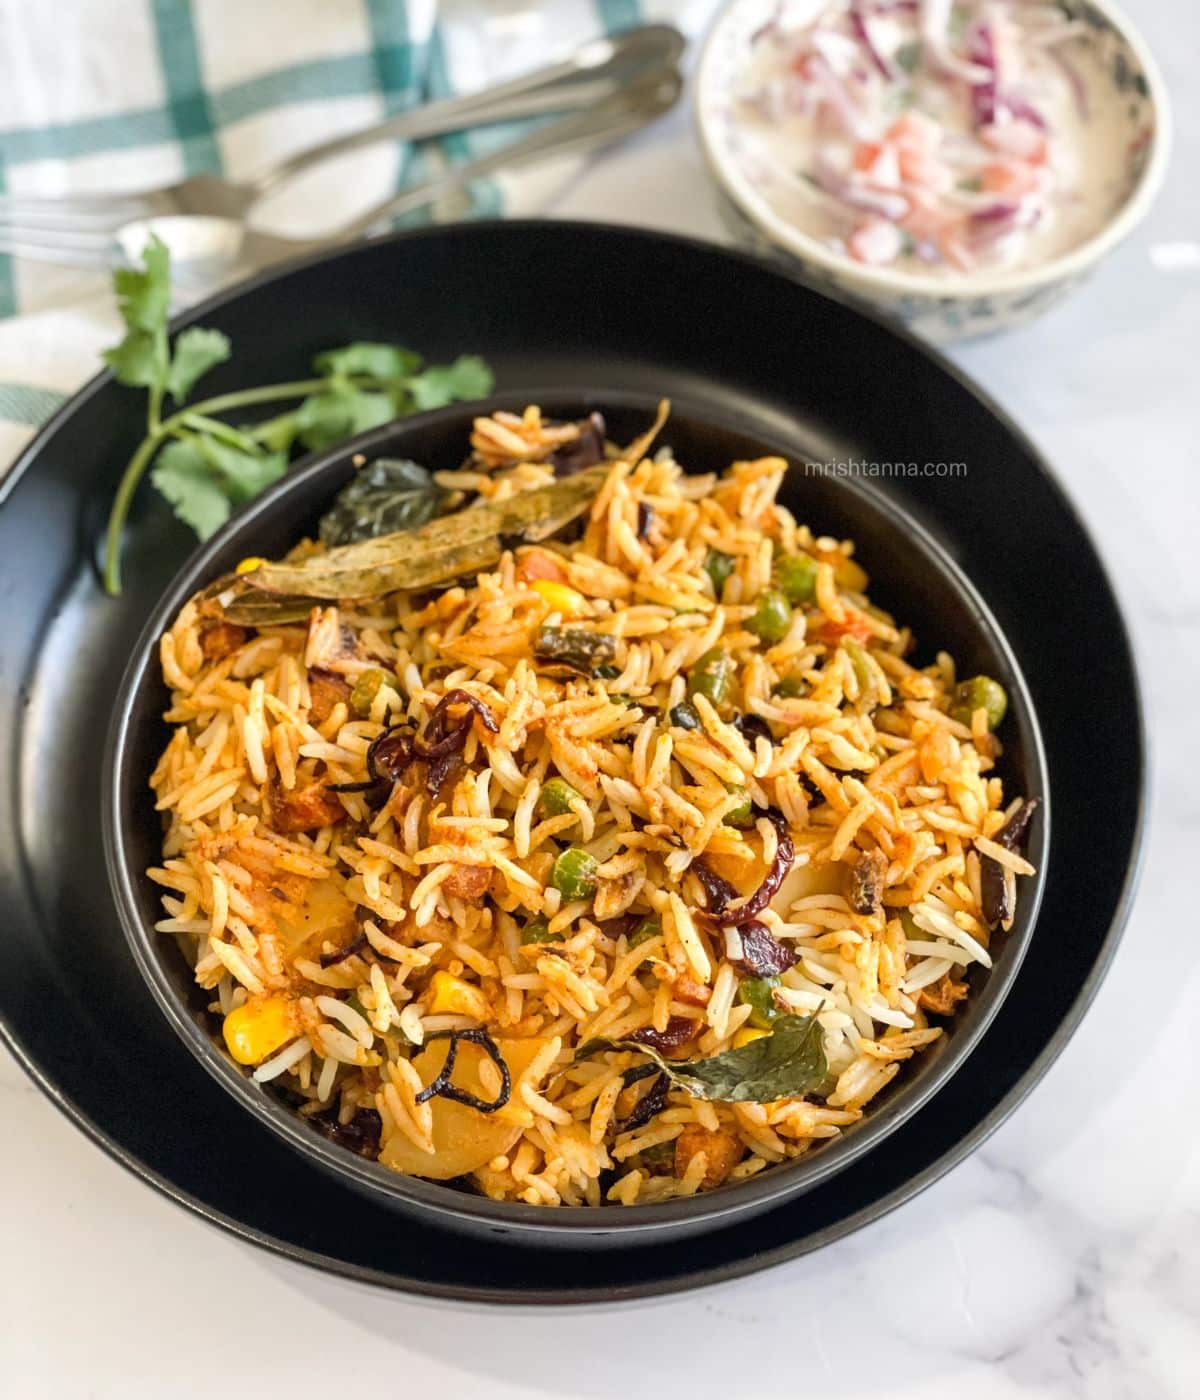 A bowl is filled with vegan dum biryani on the plate.